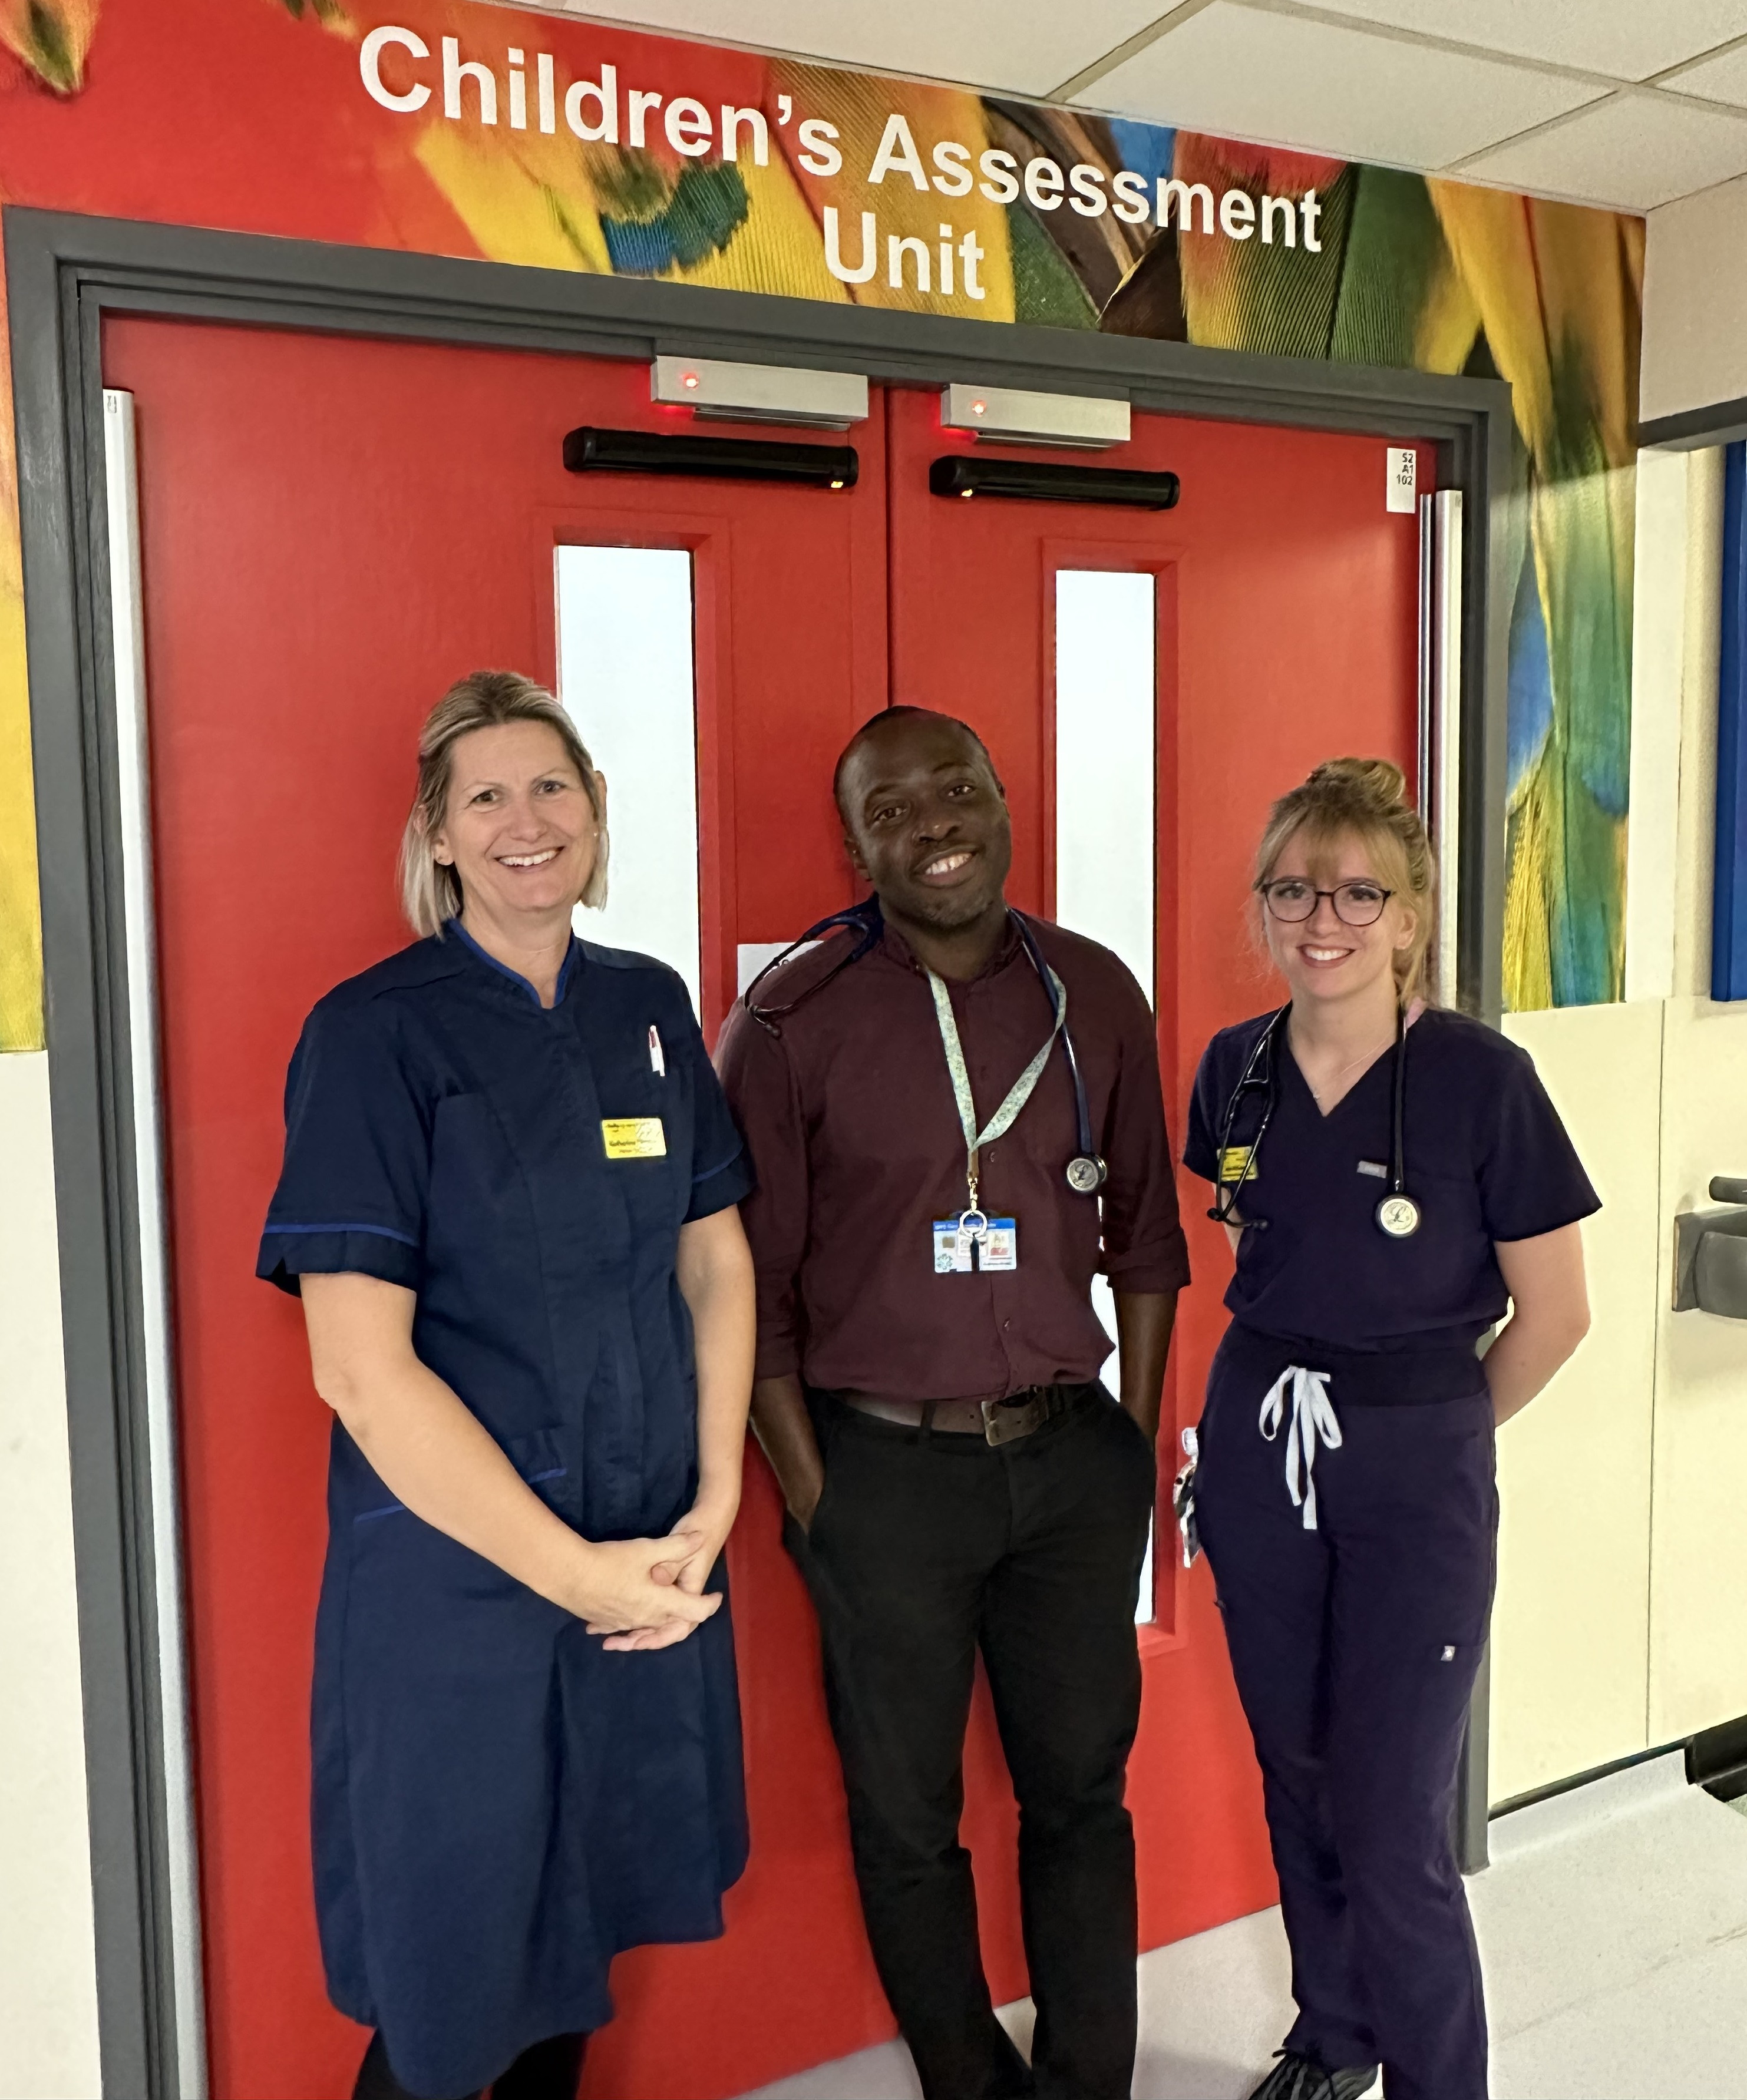 Katherine Forwood, Dr Amadi and Jess McSwiney outside the doors of the children's assessment unit